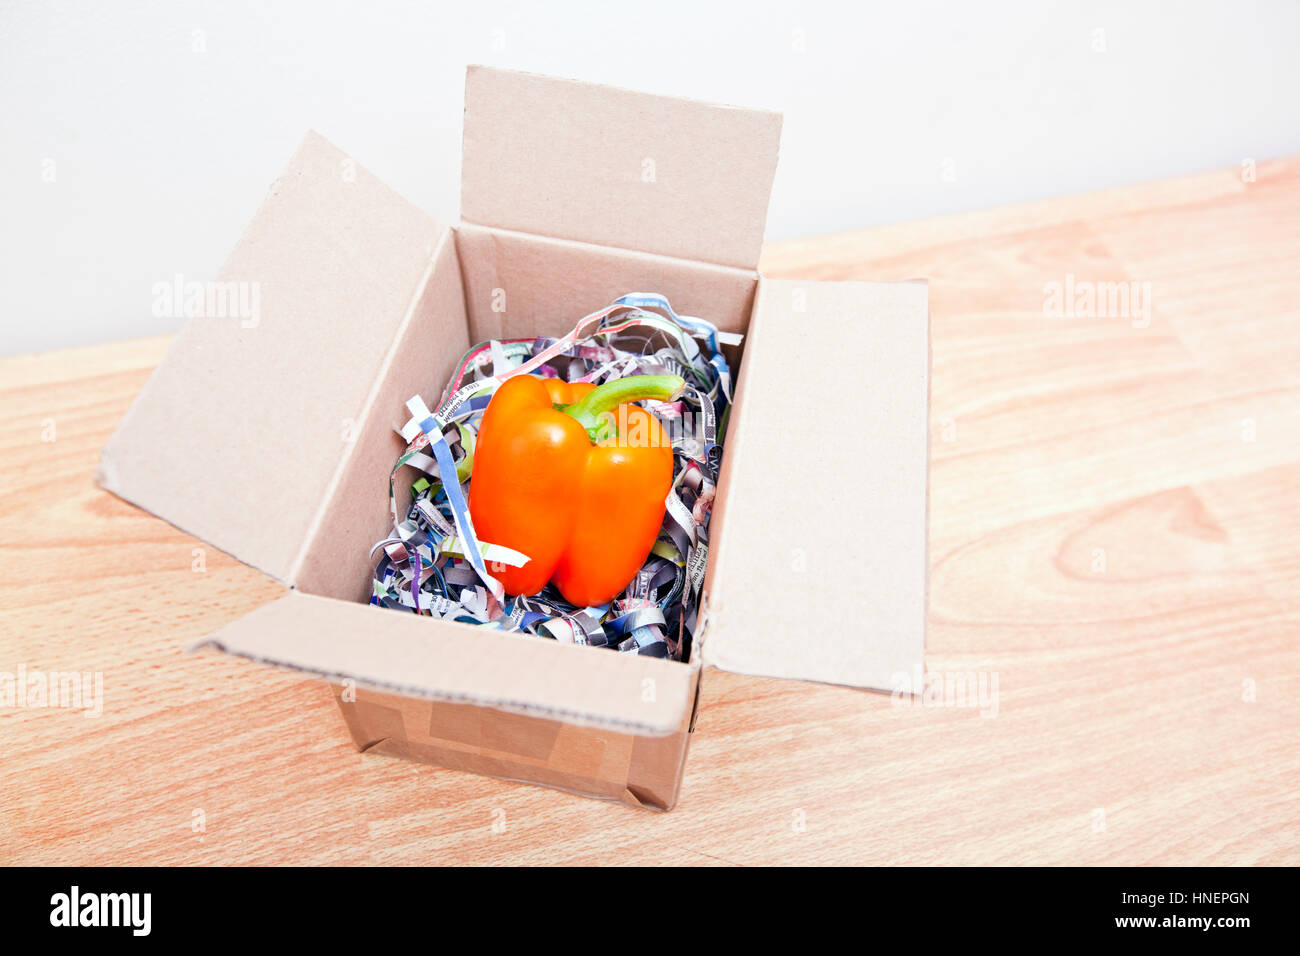 Orange bell pepper wrapped up in a box Stock Photo